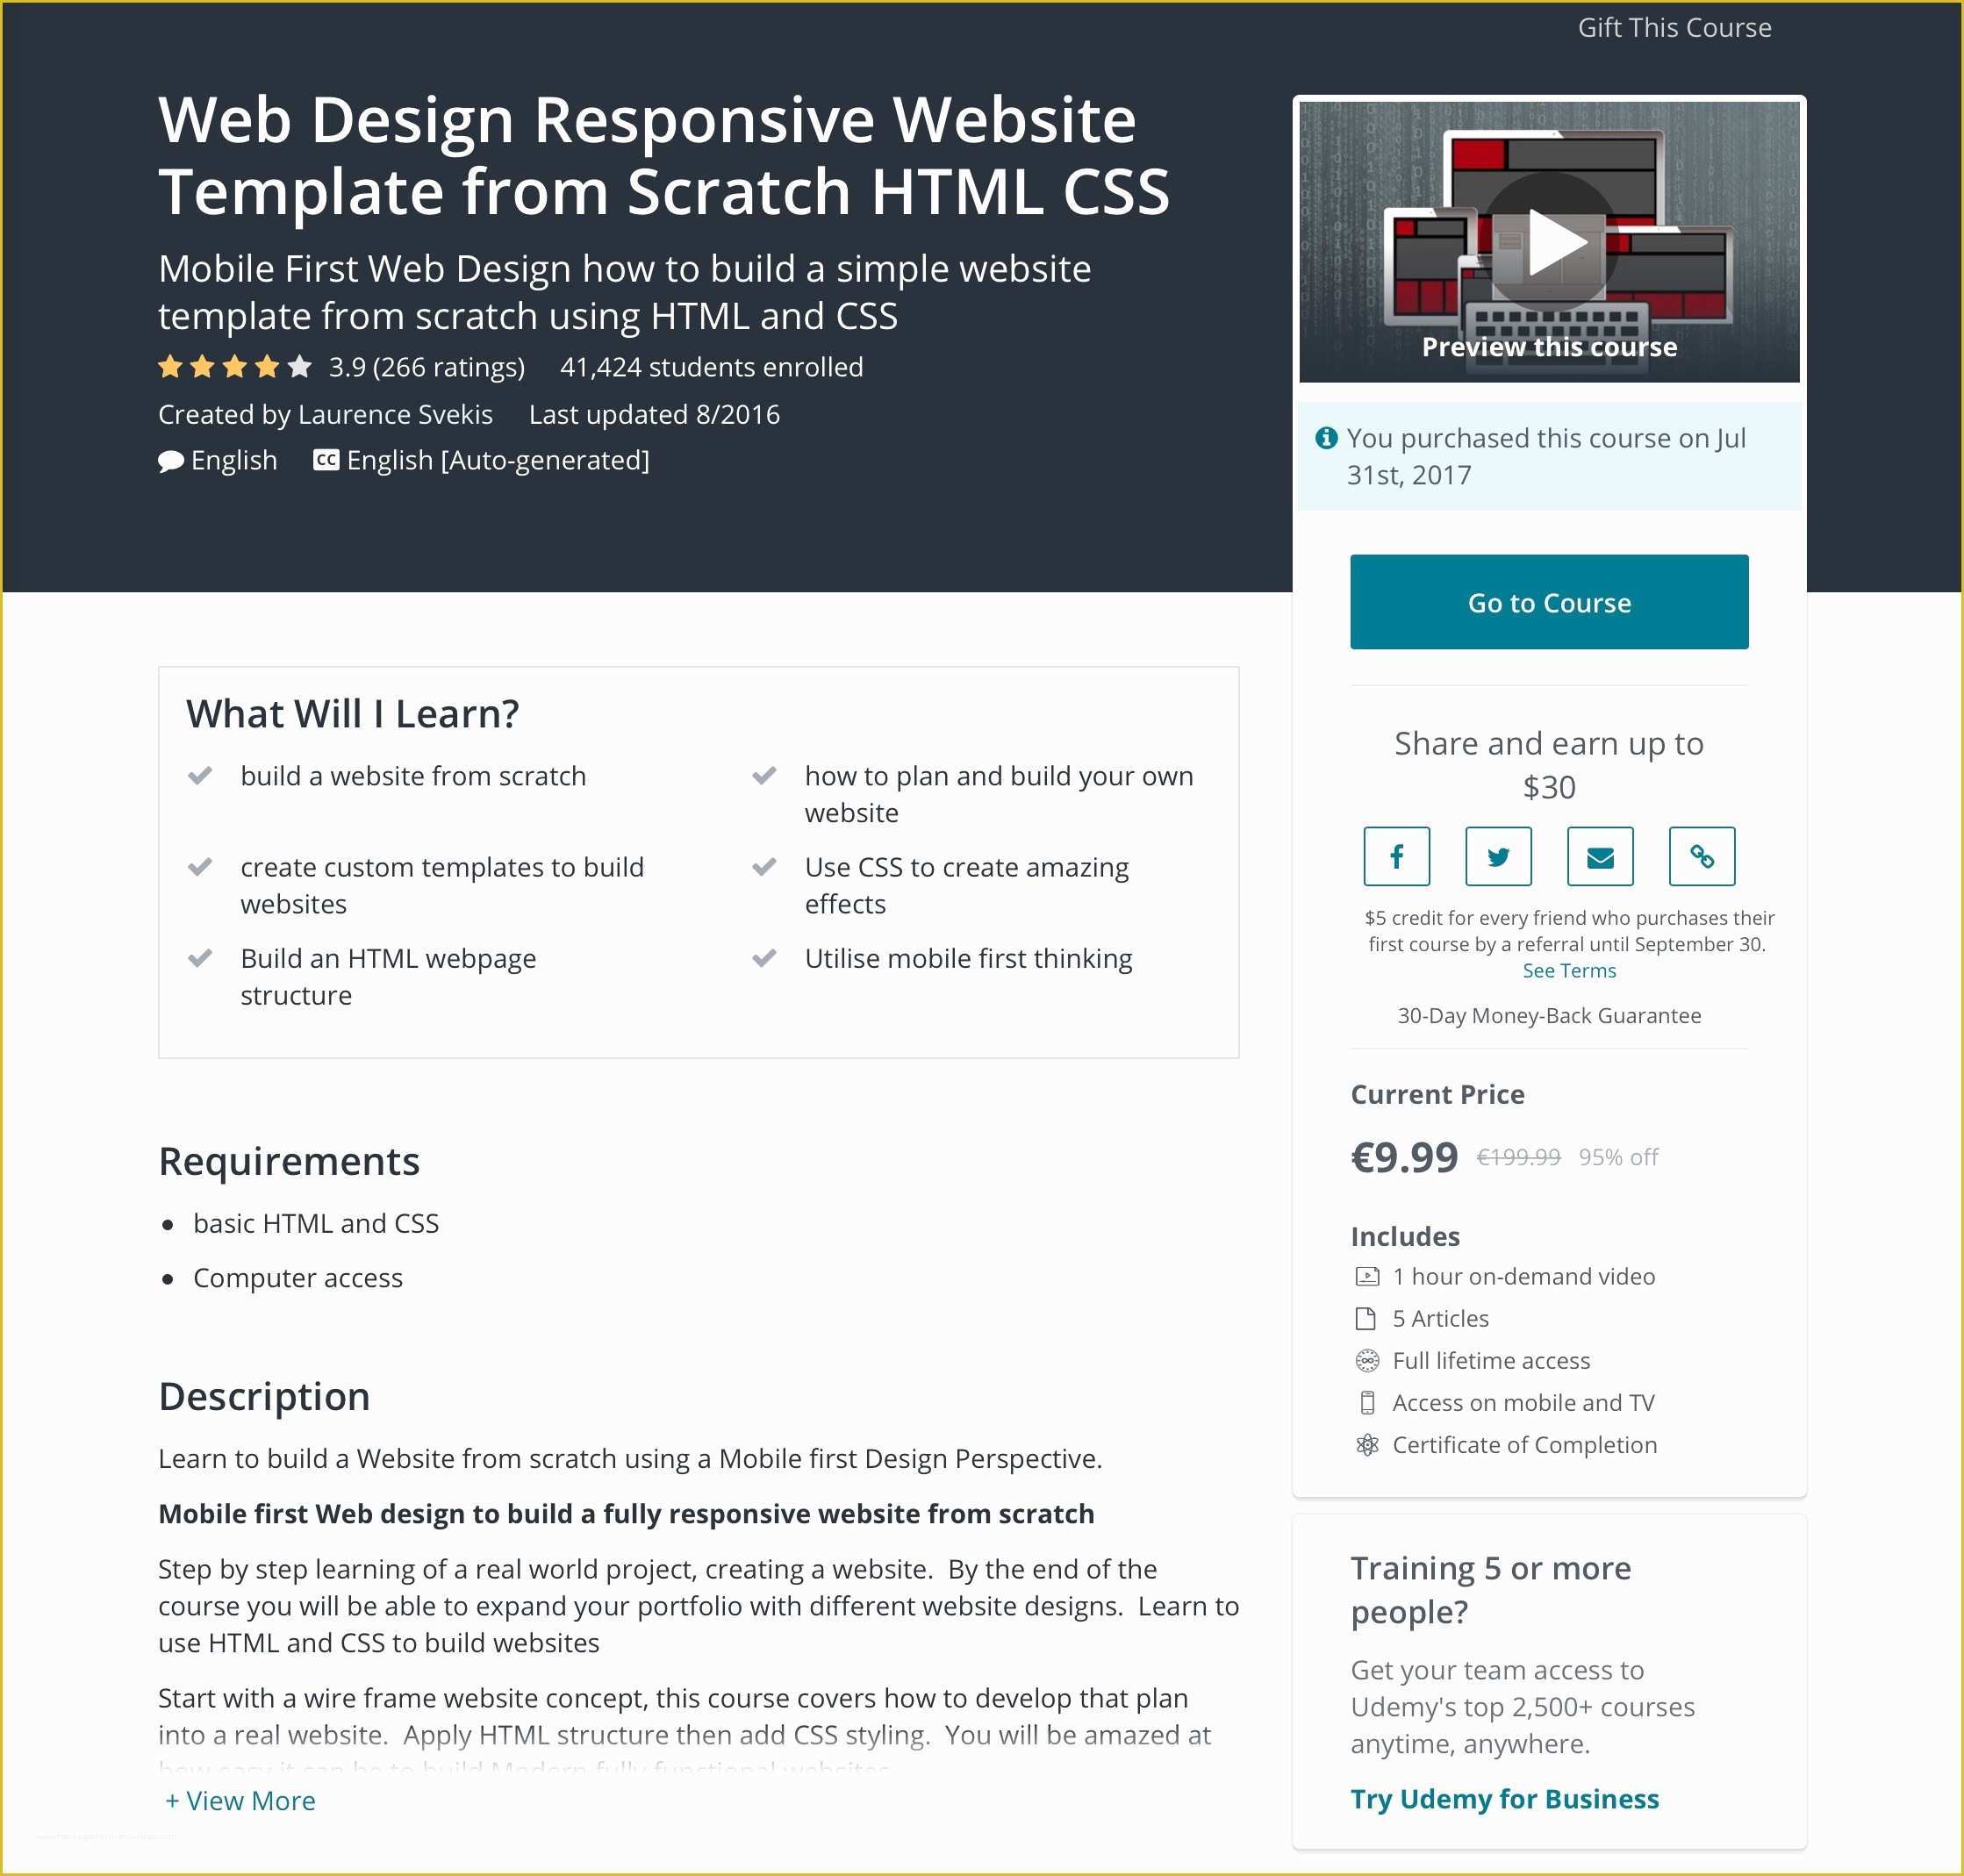 Rating Website Template Free Of Web Design Responsive Website Template From Scratch HTML